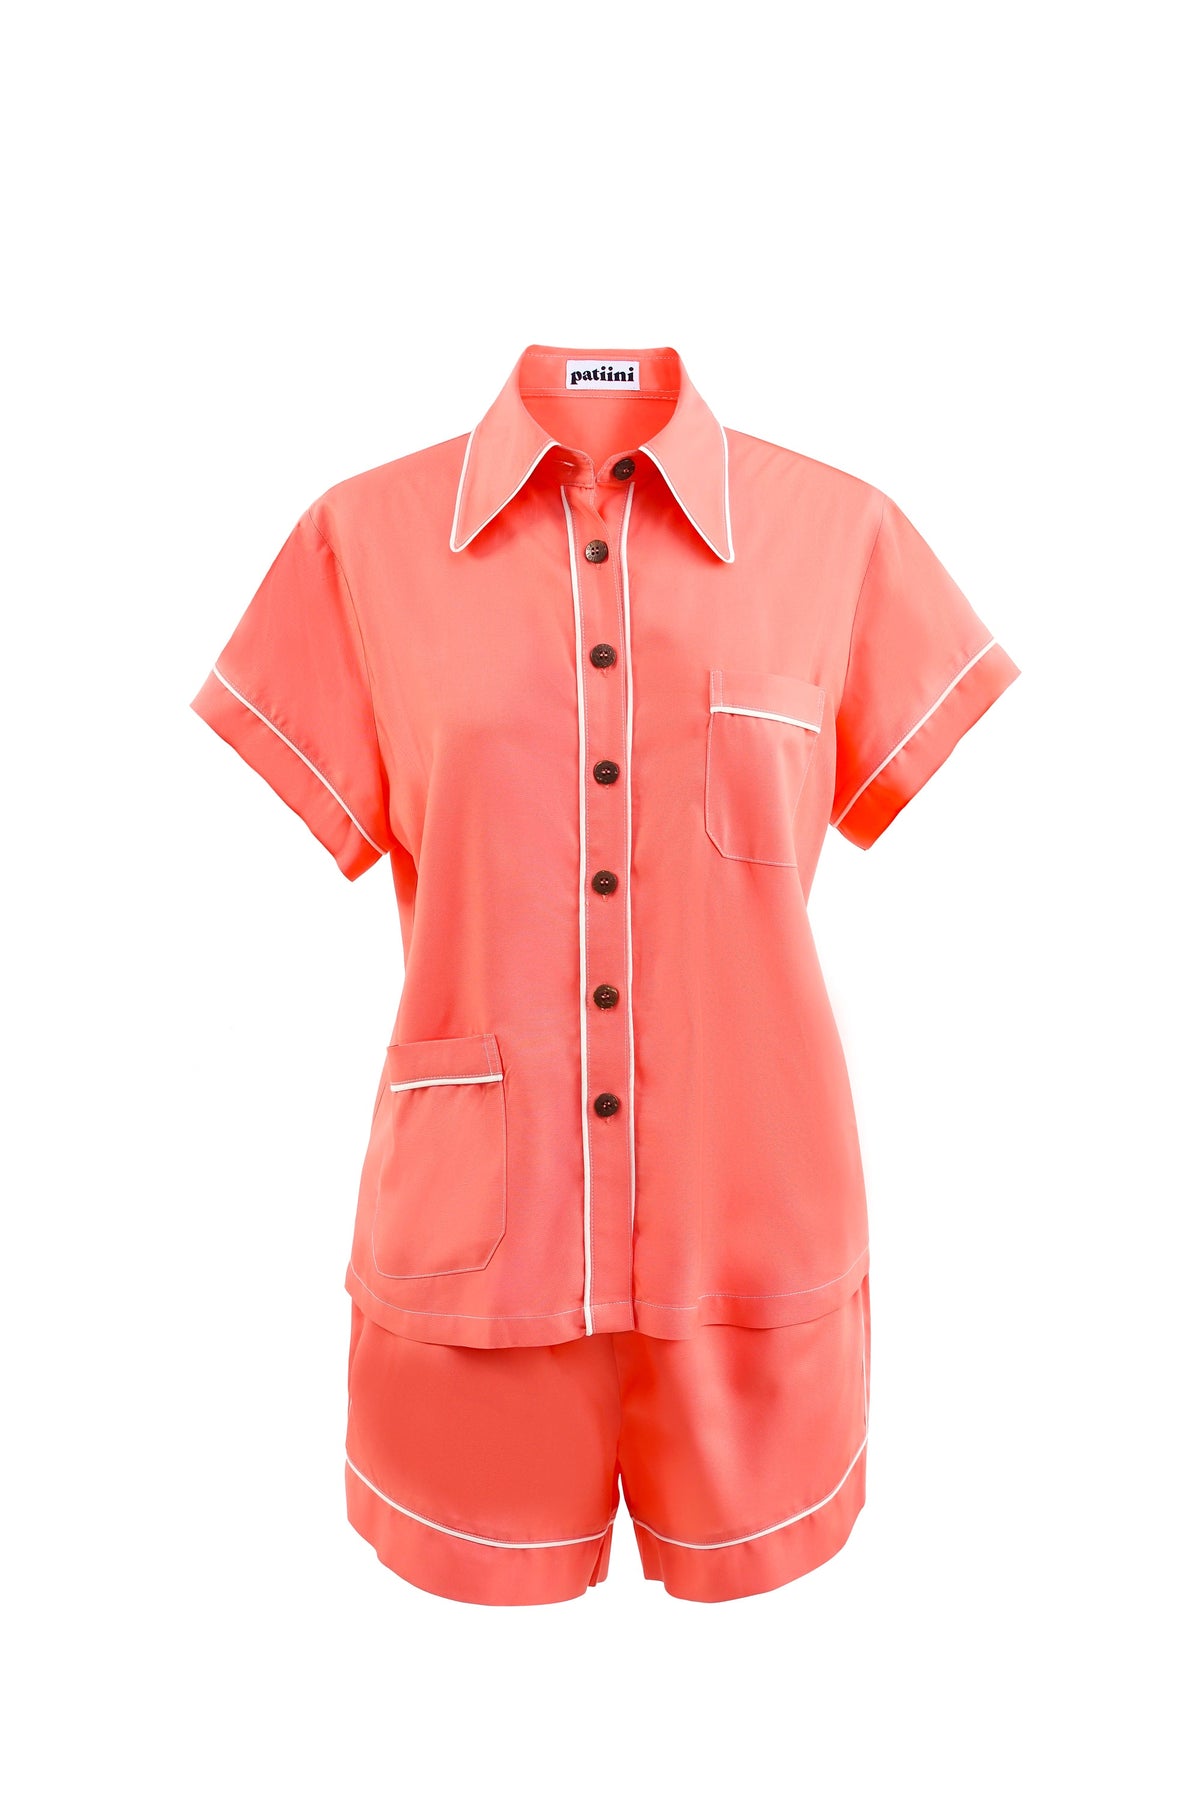 Coral short-sleeve pajama set with white contrasting piping.